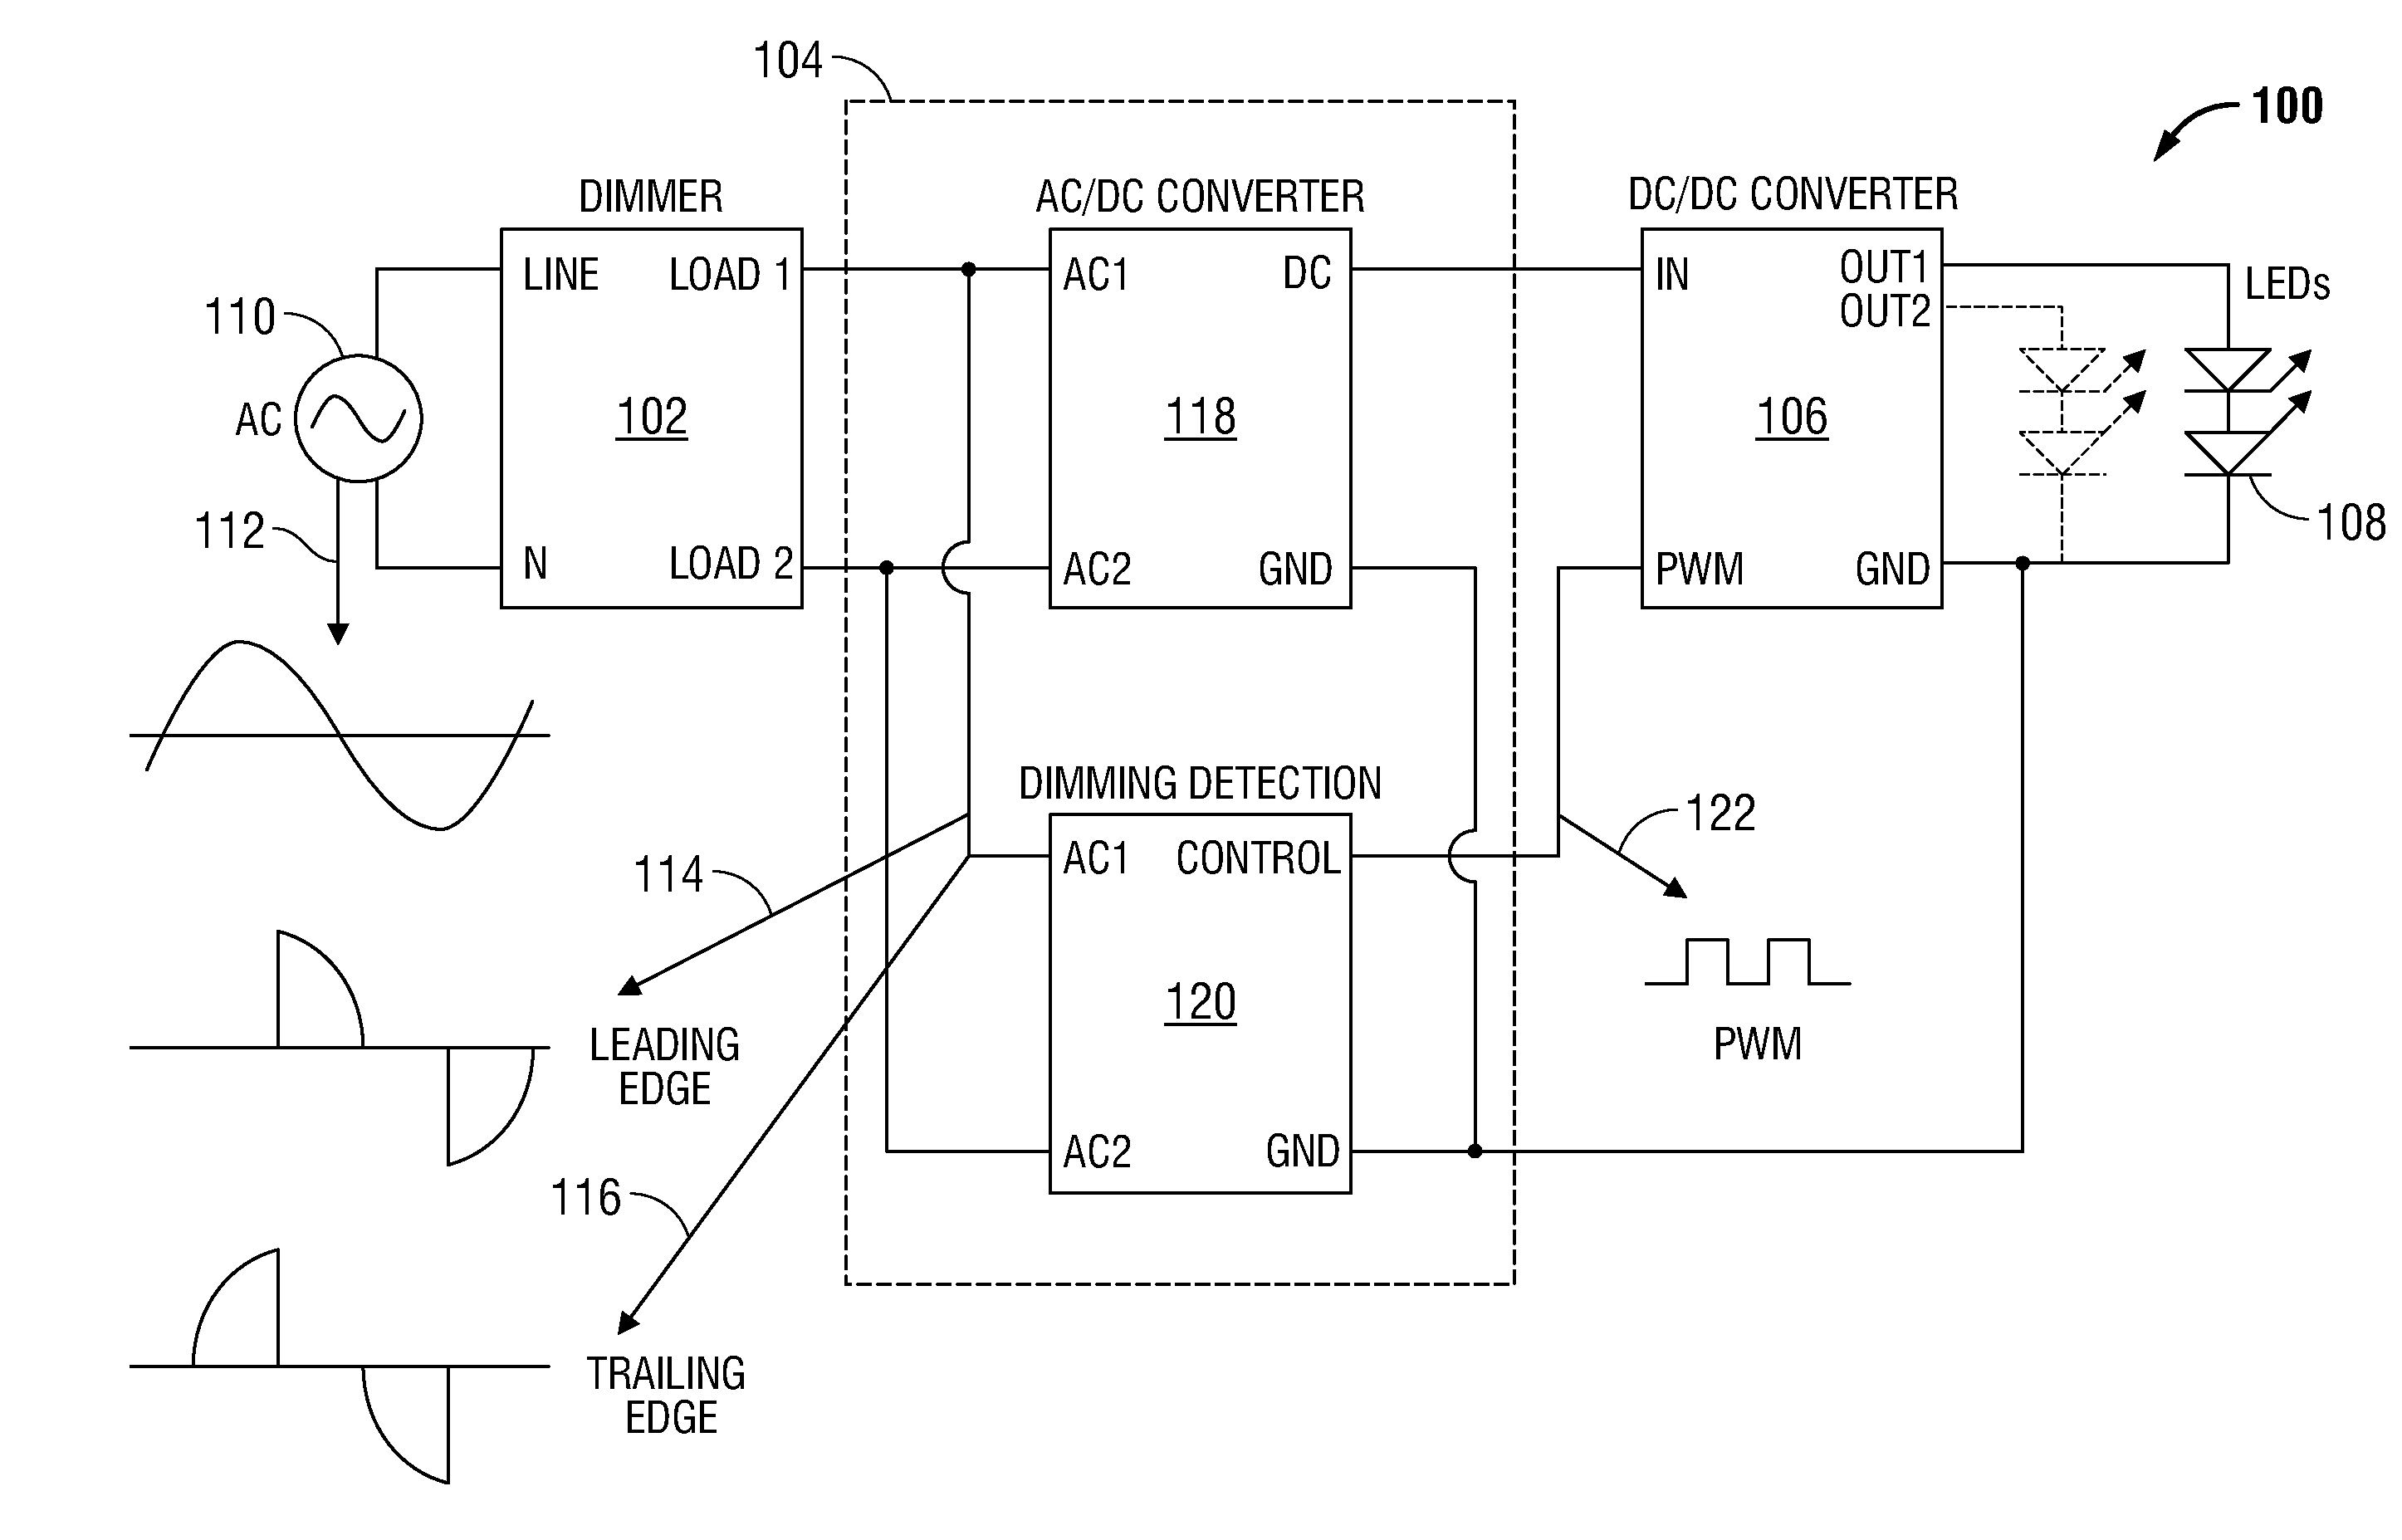 Controlling LED current from a constant voltage source